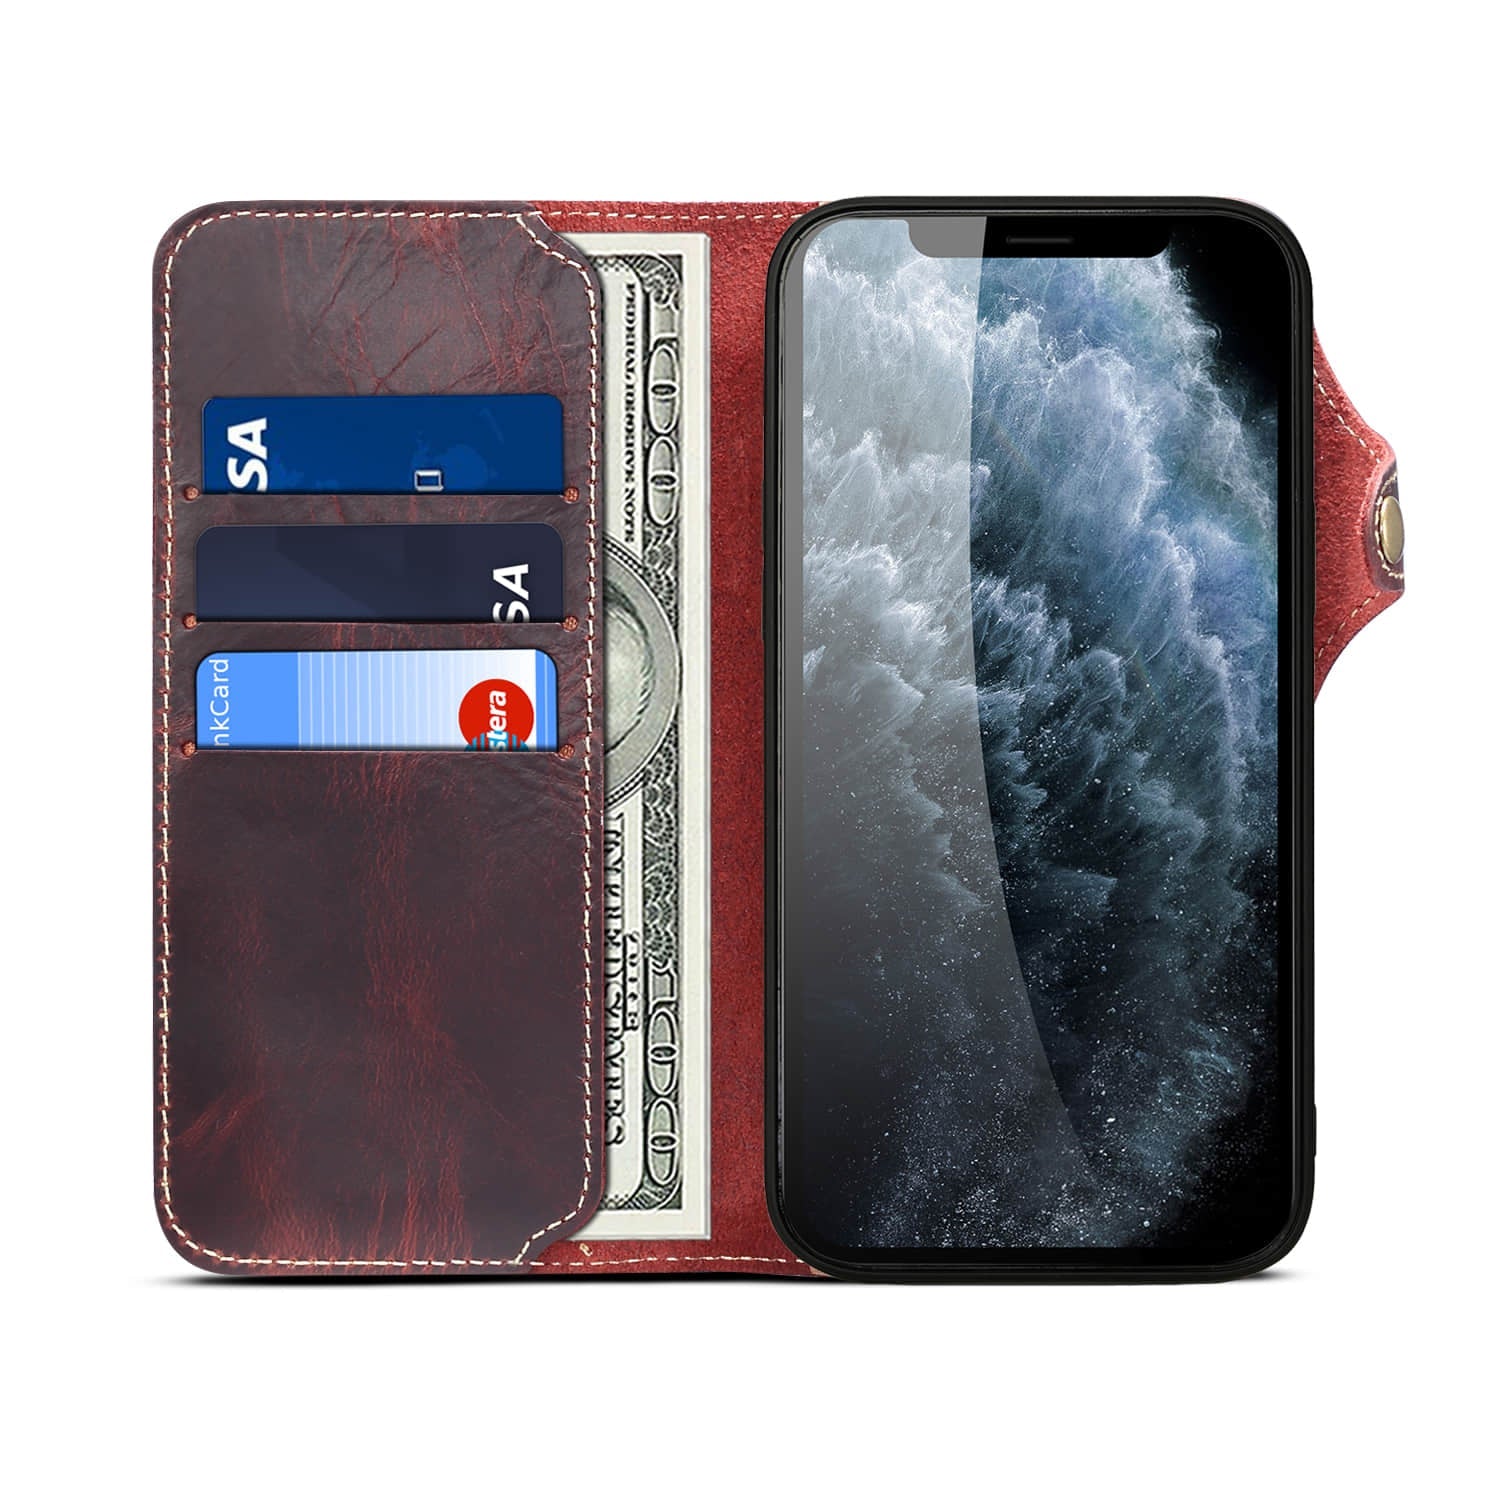 Caeouts Genuine Cowhide Leather Button Flip Phone Case Red